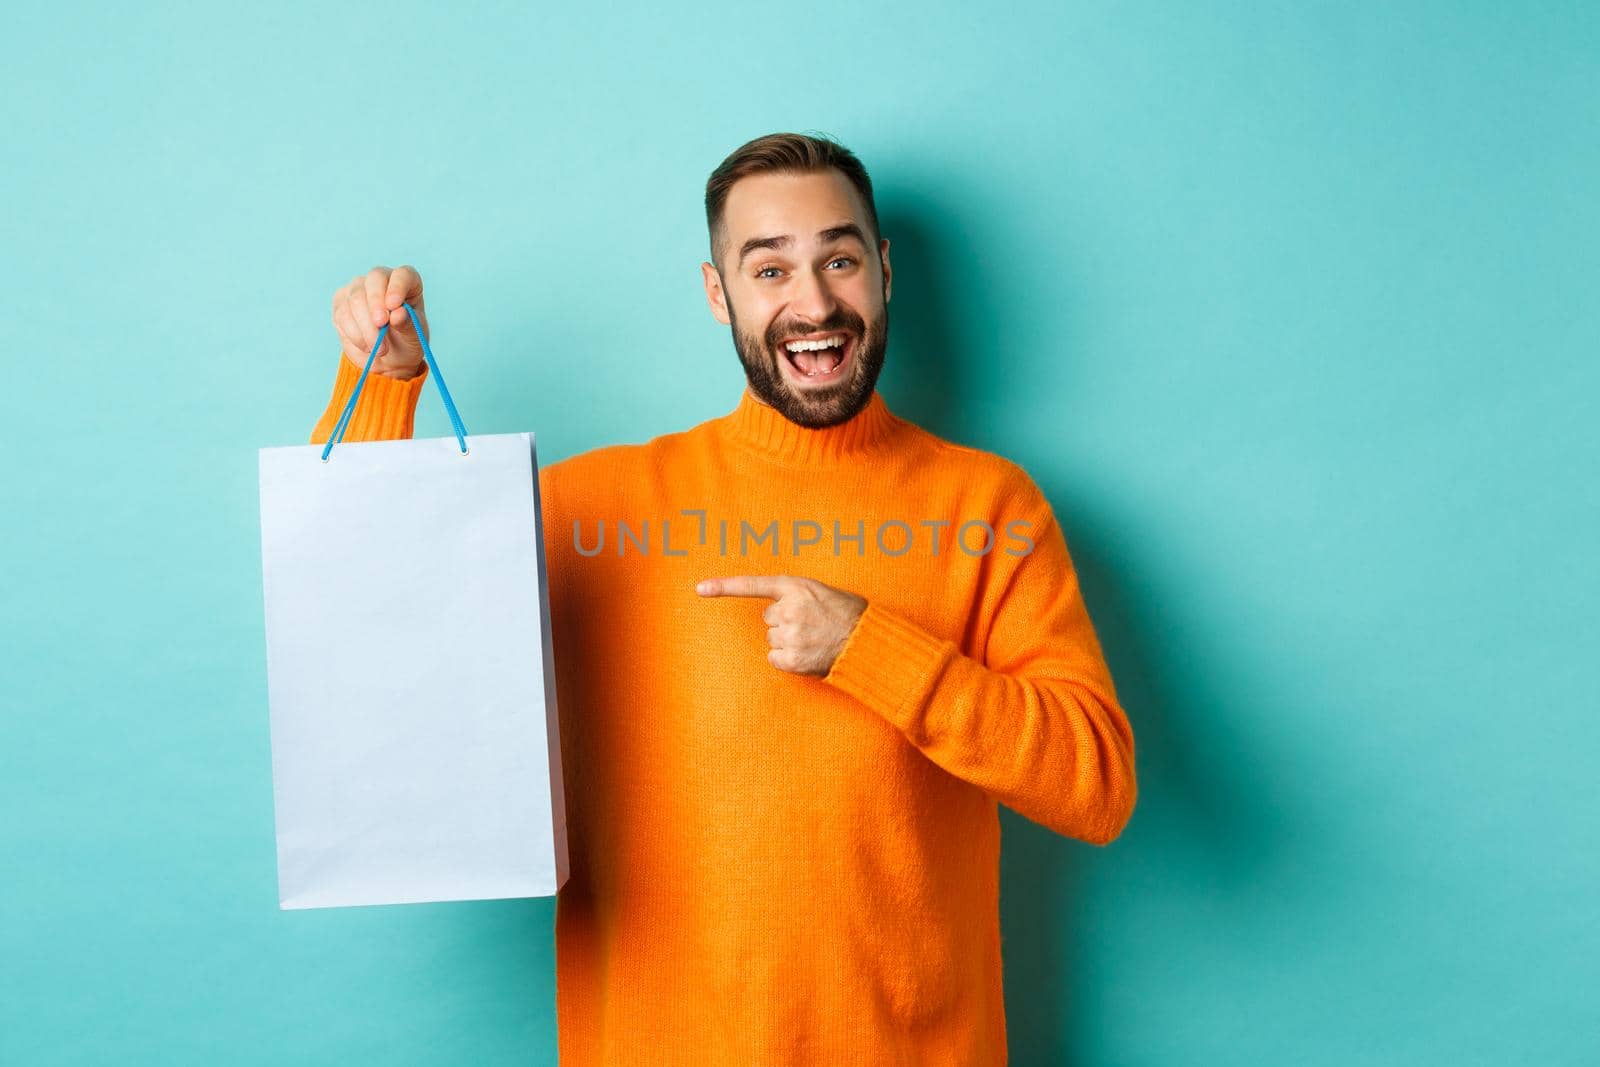 Handsome smiling man pointing finger at shopping bag, buying in stores, standing satisfied over blue background.